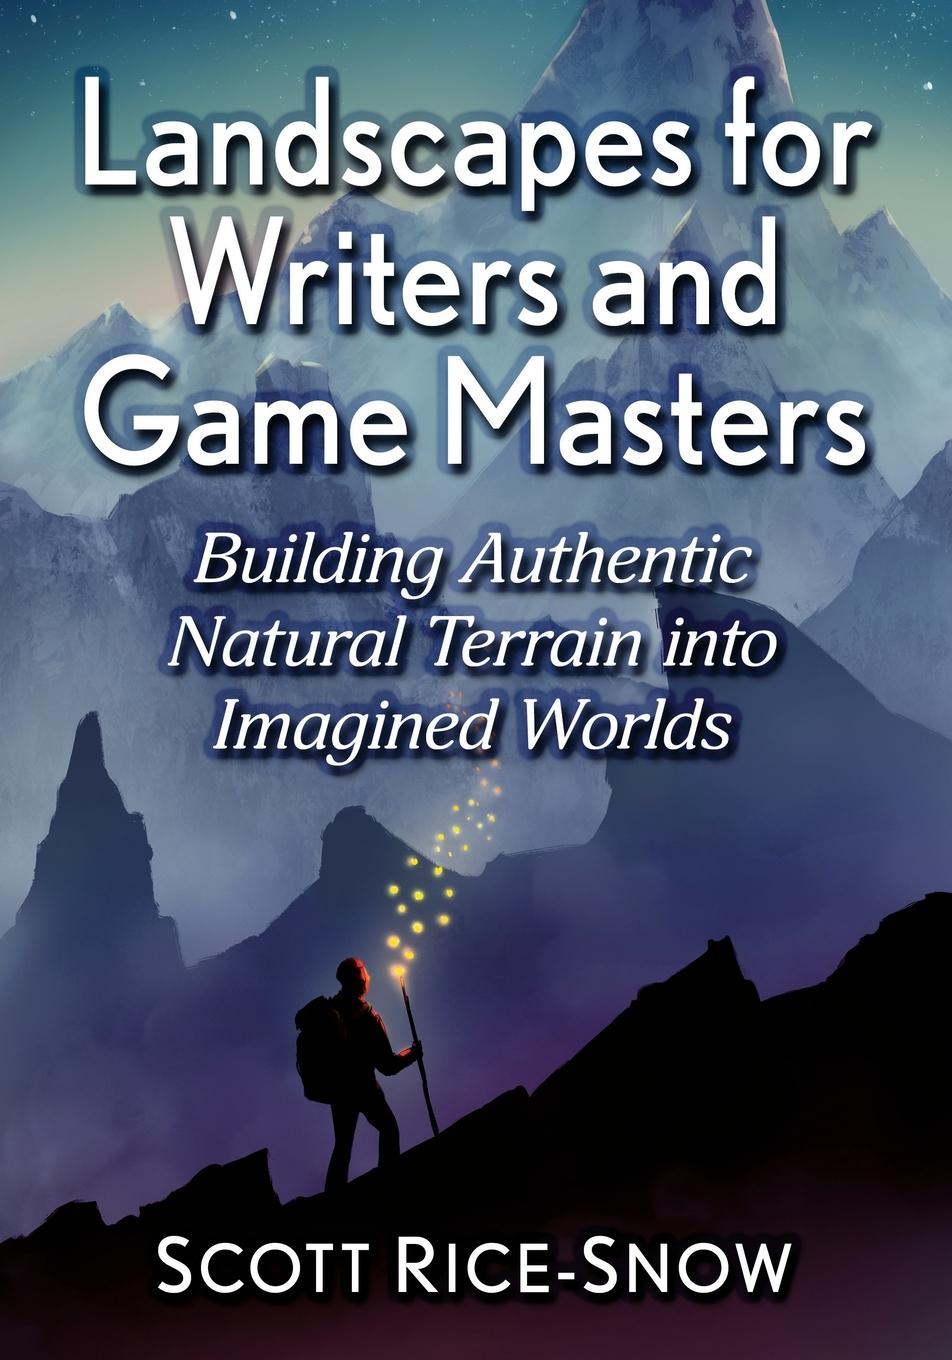 Book Landscapes for Writers and Game Masters Scott Rice-Snow